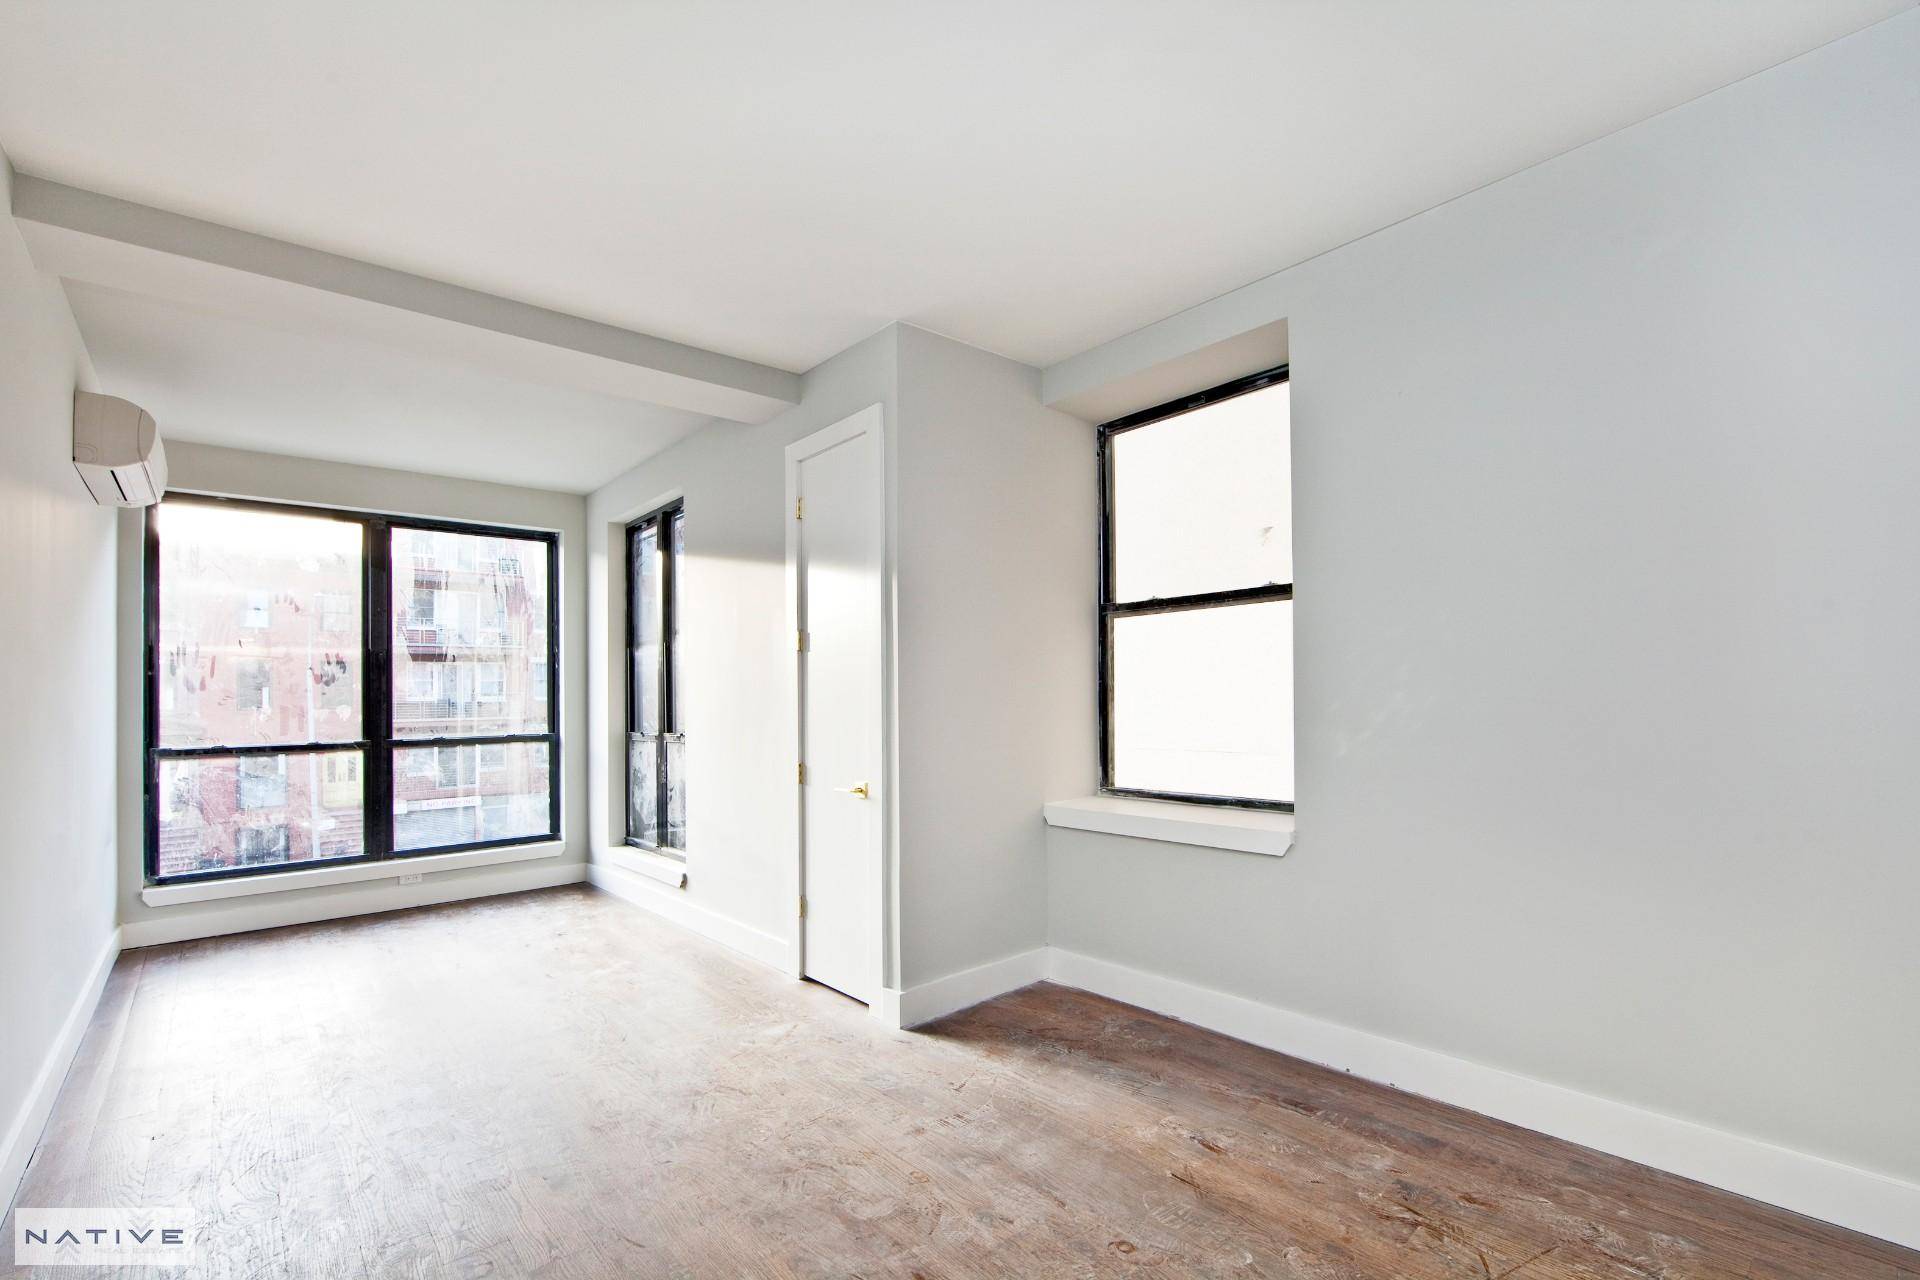 Top of the line luxury NO FEE Over sized Lofts, 1BR and 2BR units are now available in this gorgeous converted Historic Mansion on a brownstone street in the heart ...